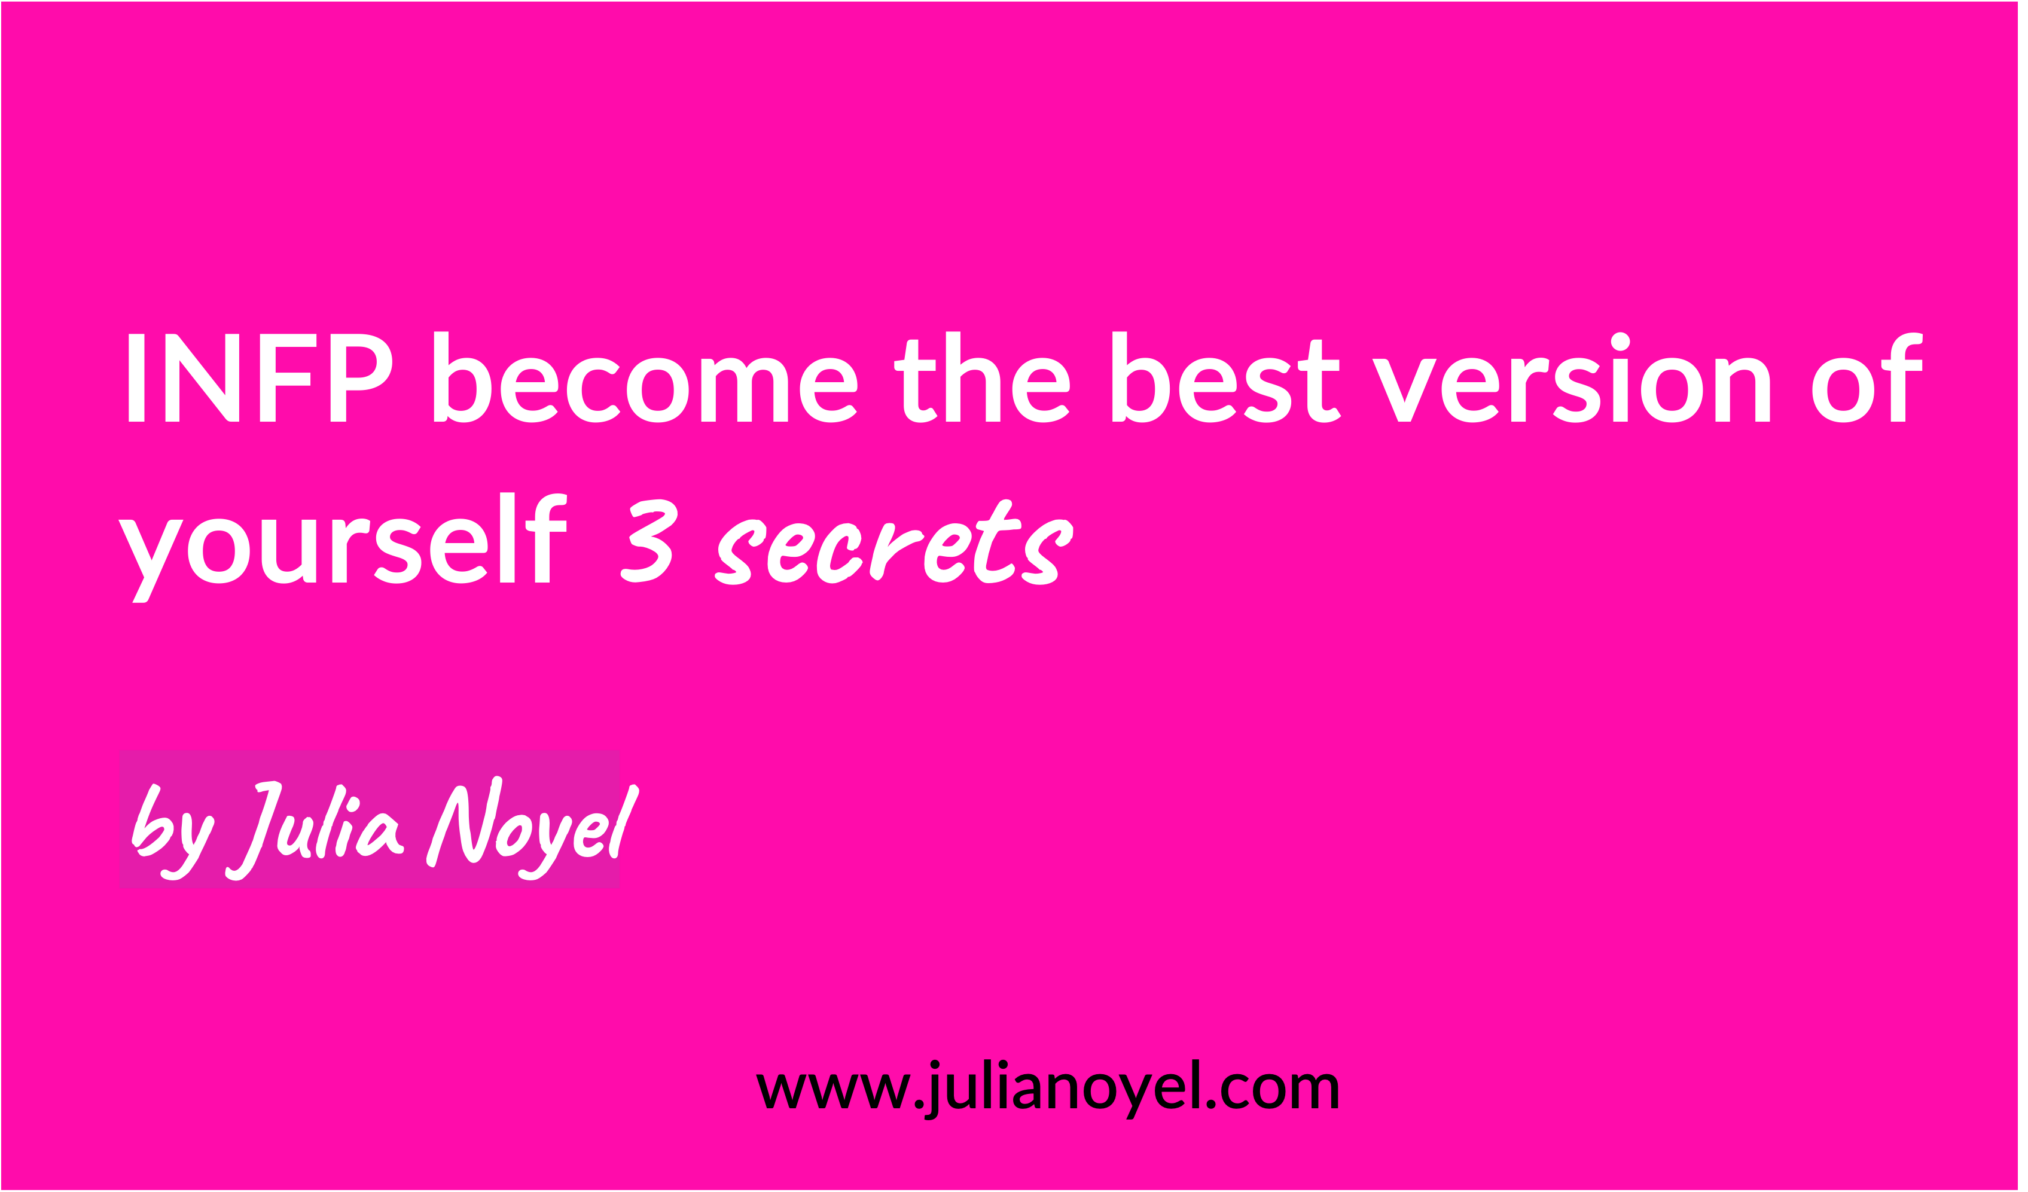 INFP become the best version of yourself 3 secrets
